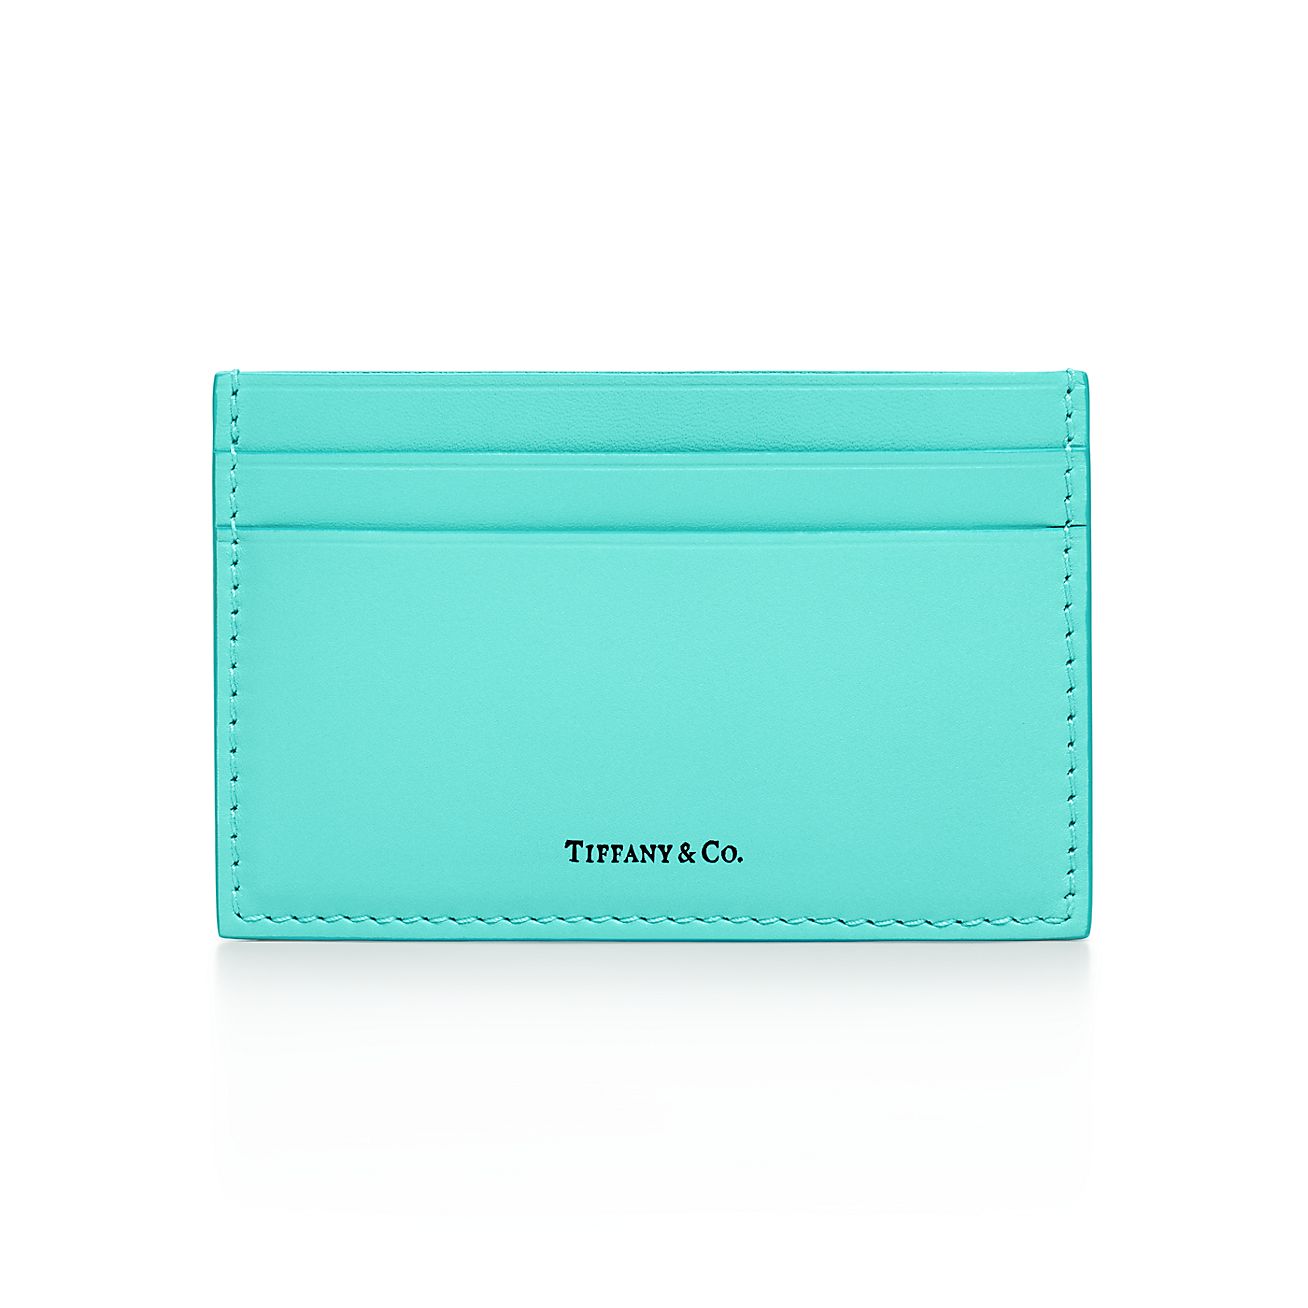 tiffany and co credit card payment